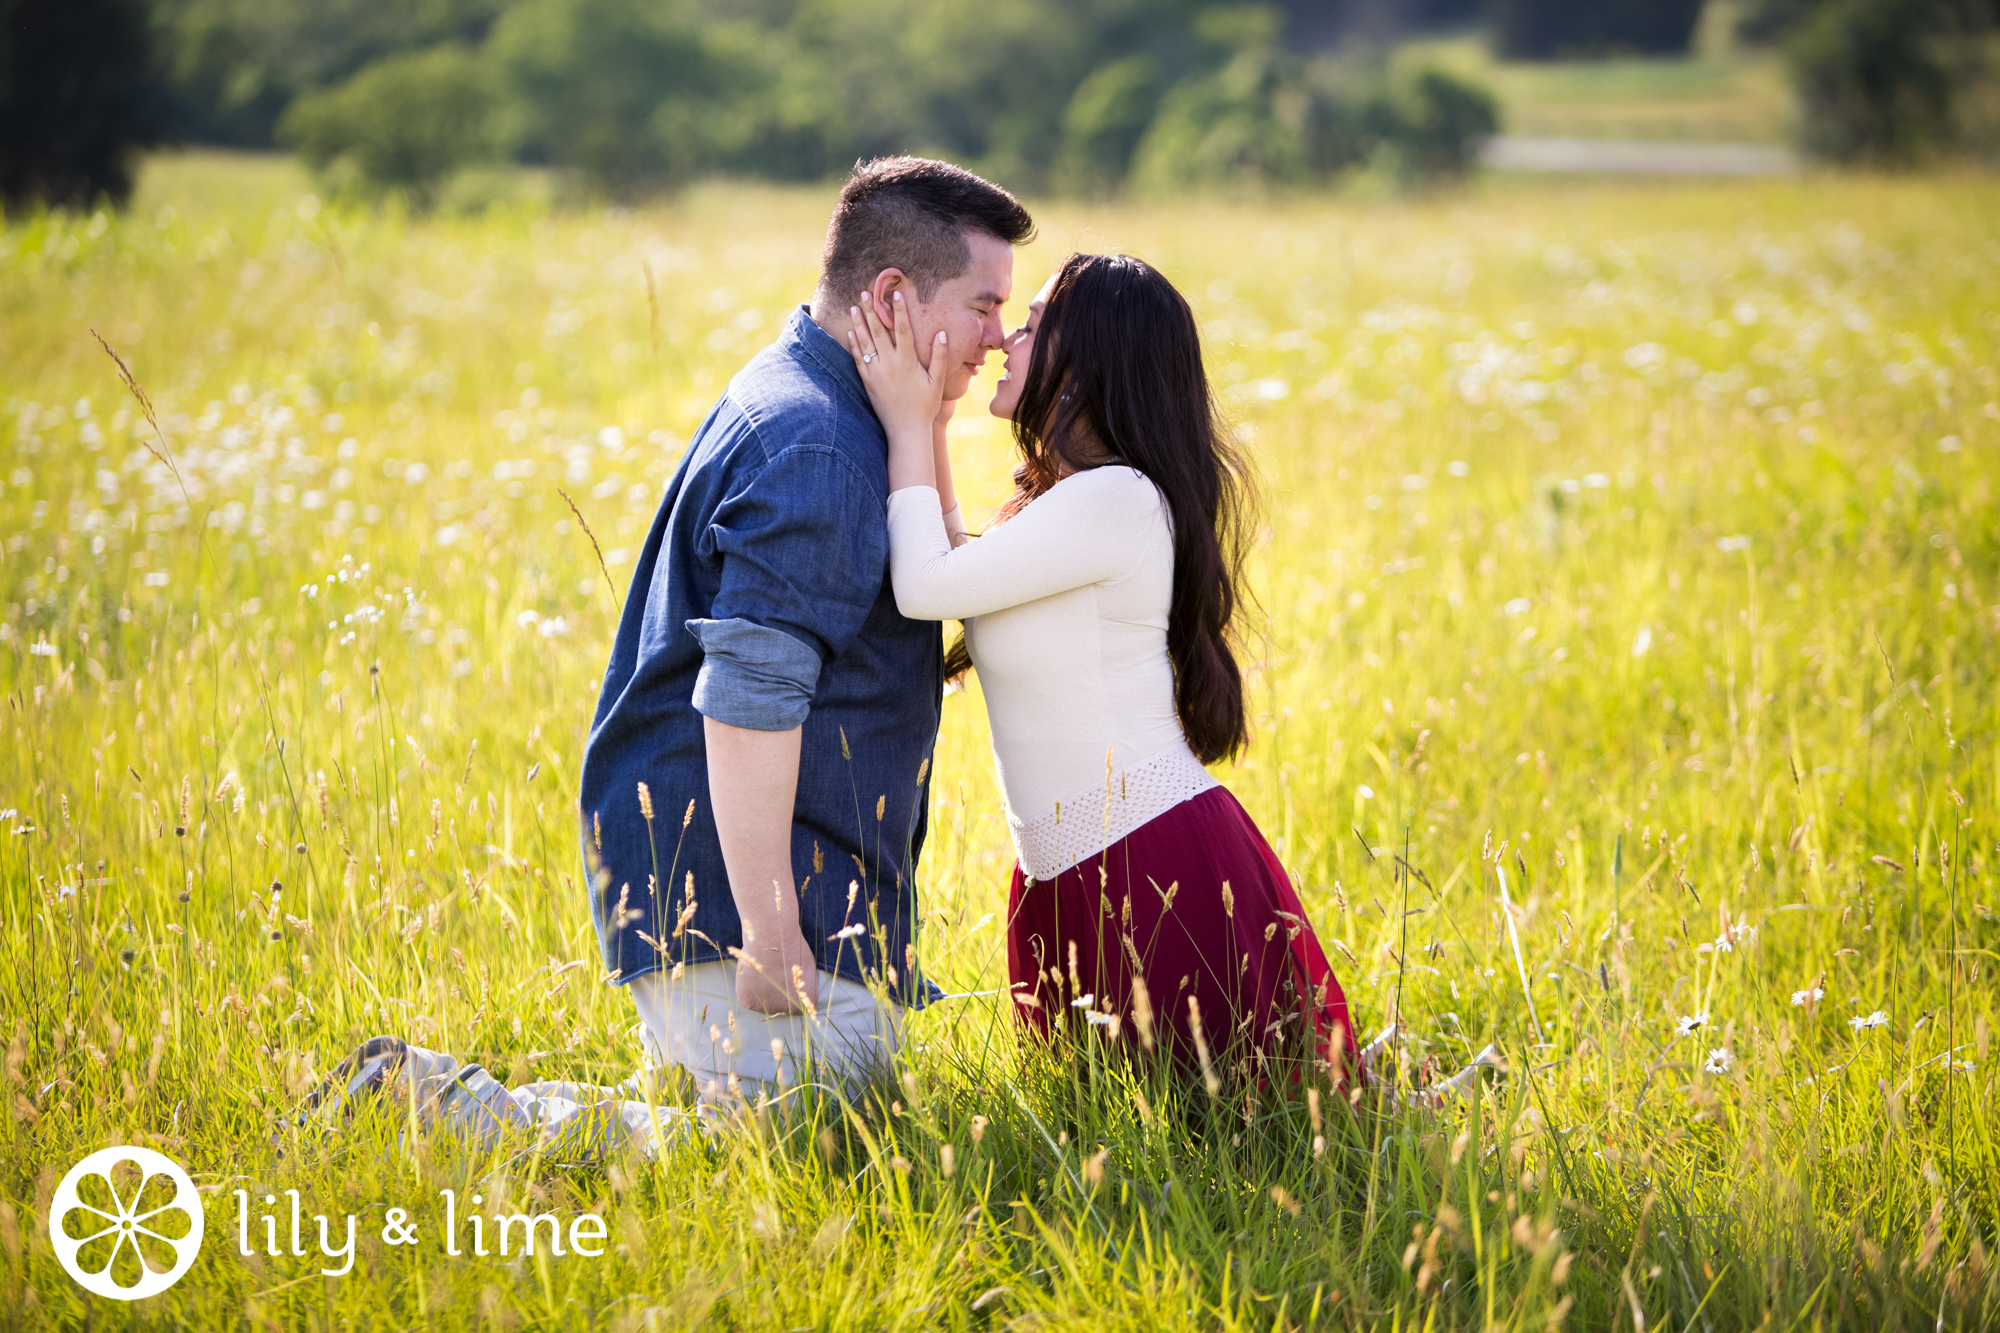 tips for choosing an engagement photo location